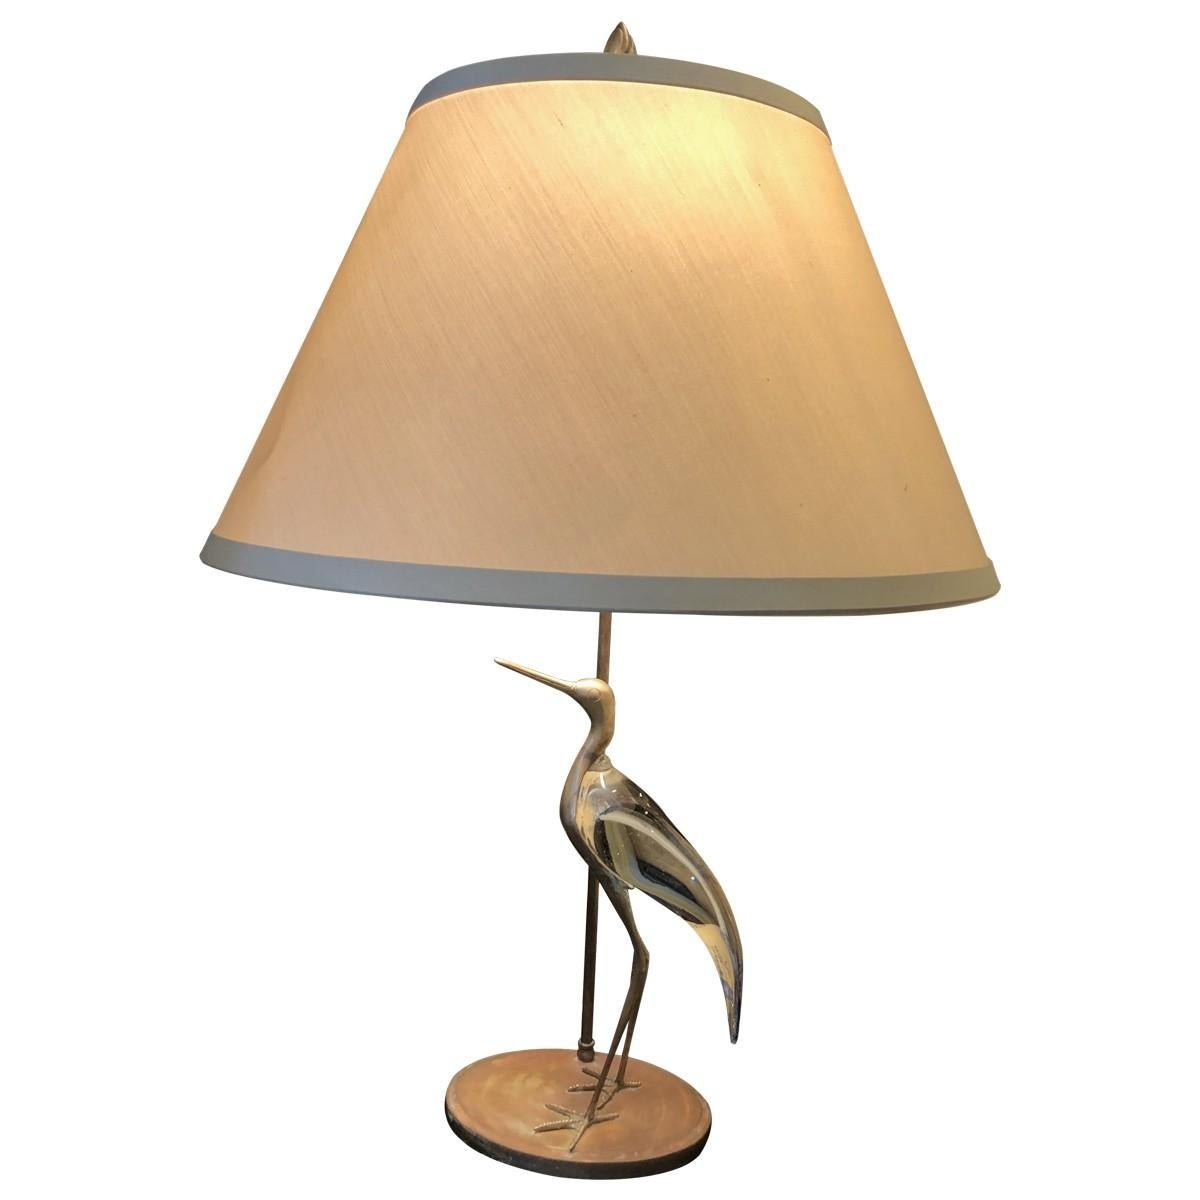 Bring a festive look to your living room or office with this whimsical avian lamp. A gold-tone Brass metal base glass gives the lamp added glamour. Does not include shade.
 